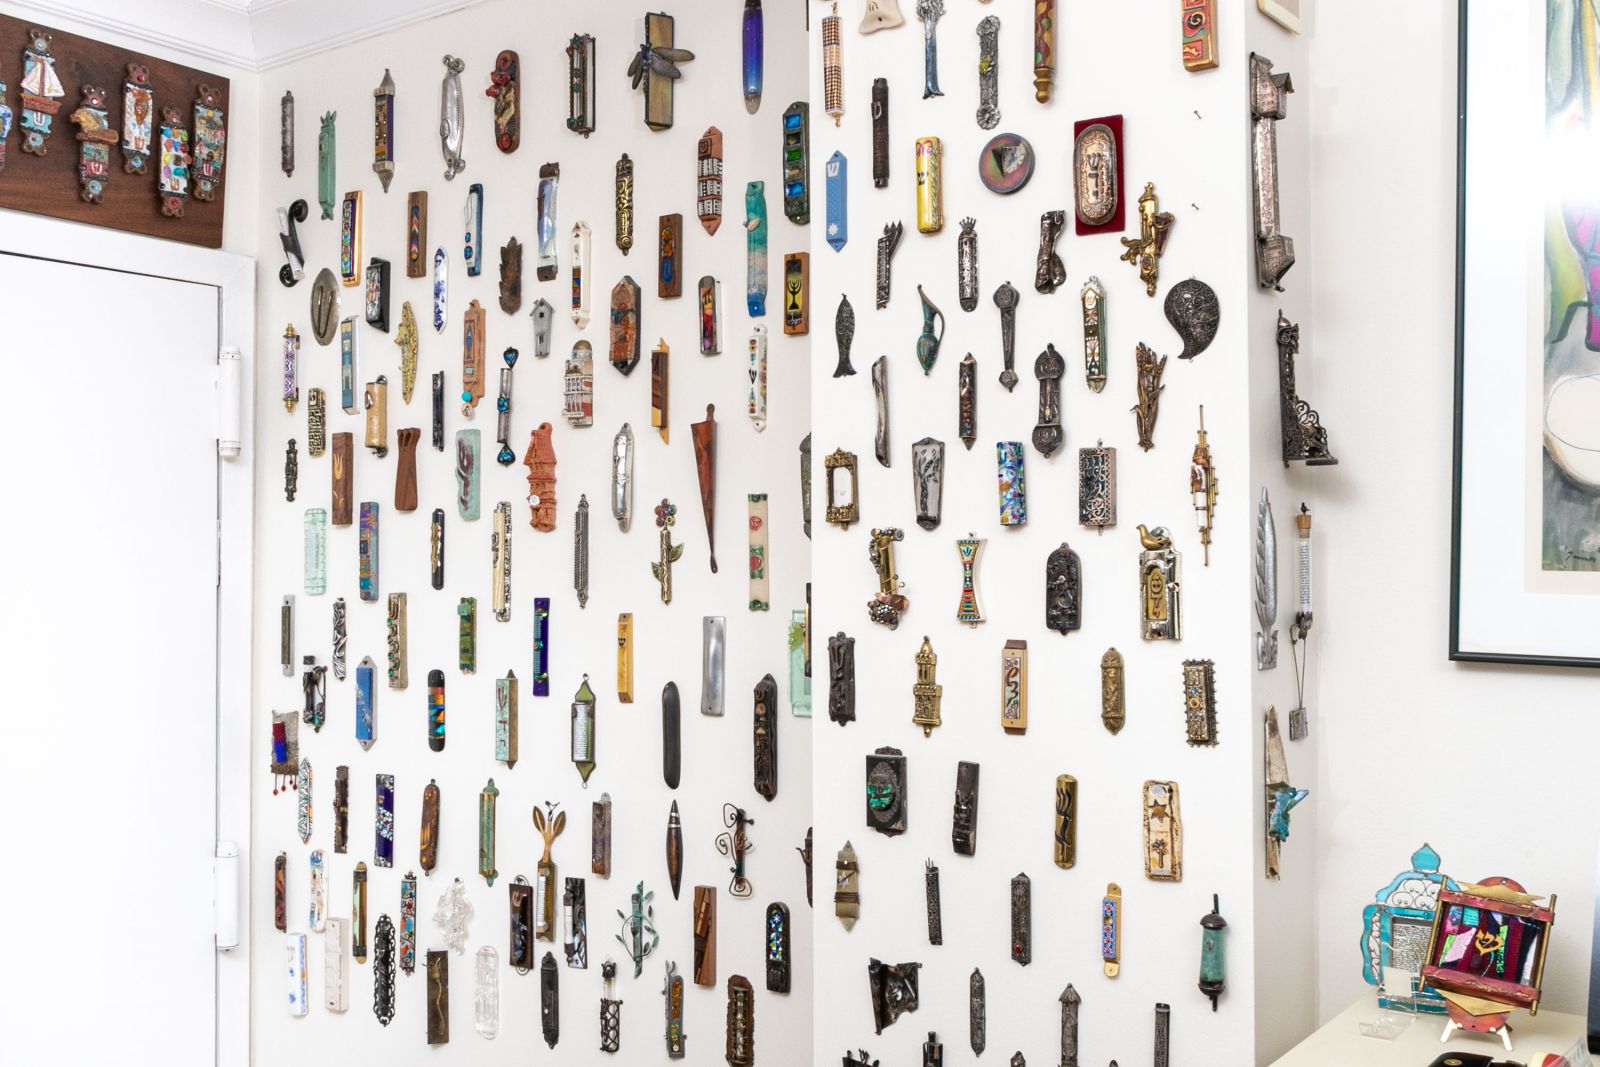 The Rothman mezuzah wall is filled with a collection sourced internationally over decatdes